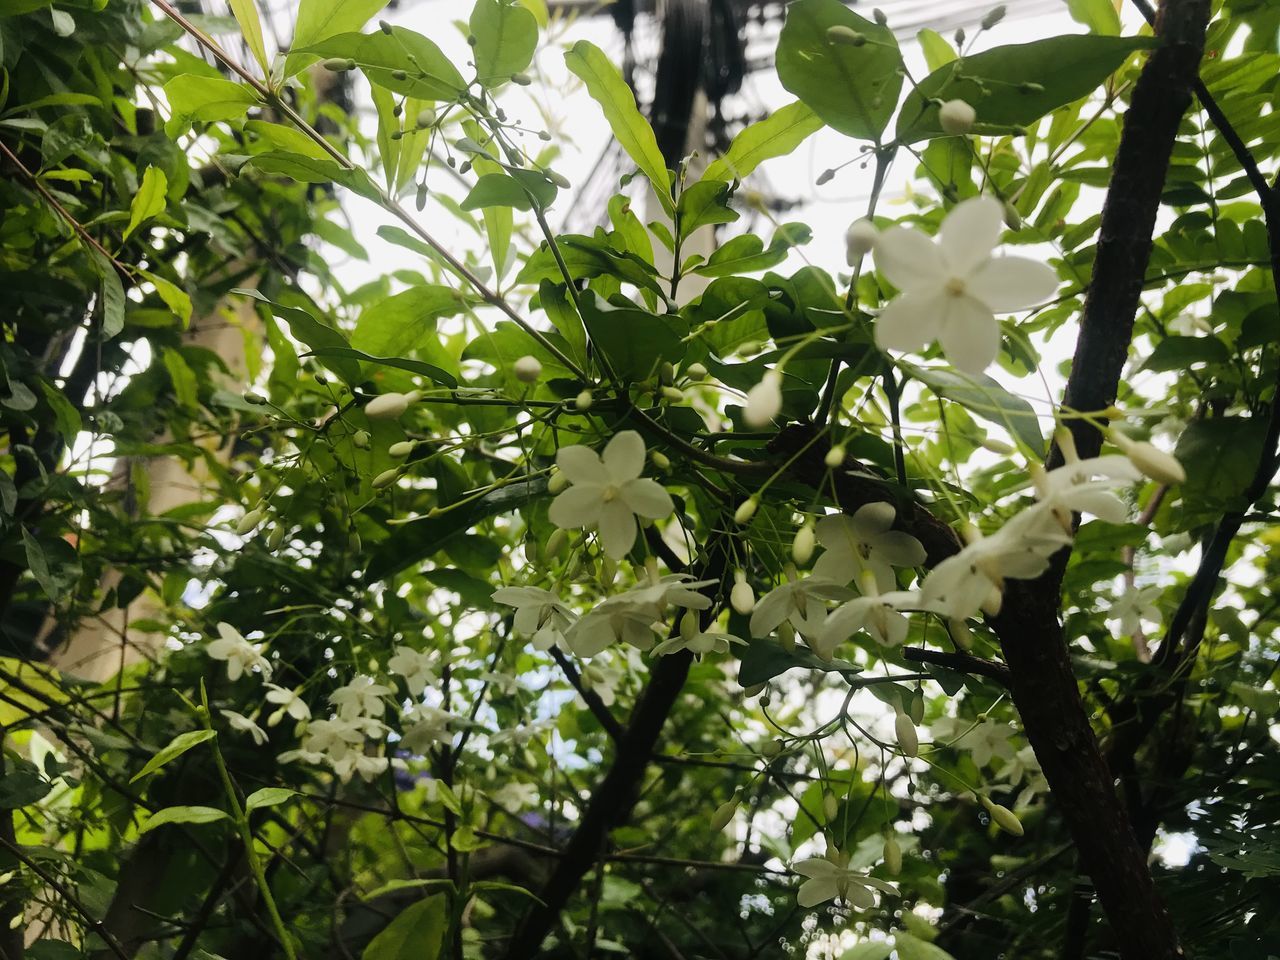 plant, tree, leaf, plant part, growth, branch, green, produce, nature, flower, low angle view, beauty in nature, no people, food, flowering plant, sky, sunlight, outdoors, freshness, day, food and drink, blossom, shrub, fruit